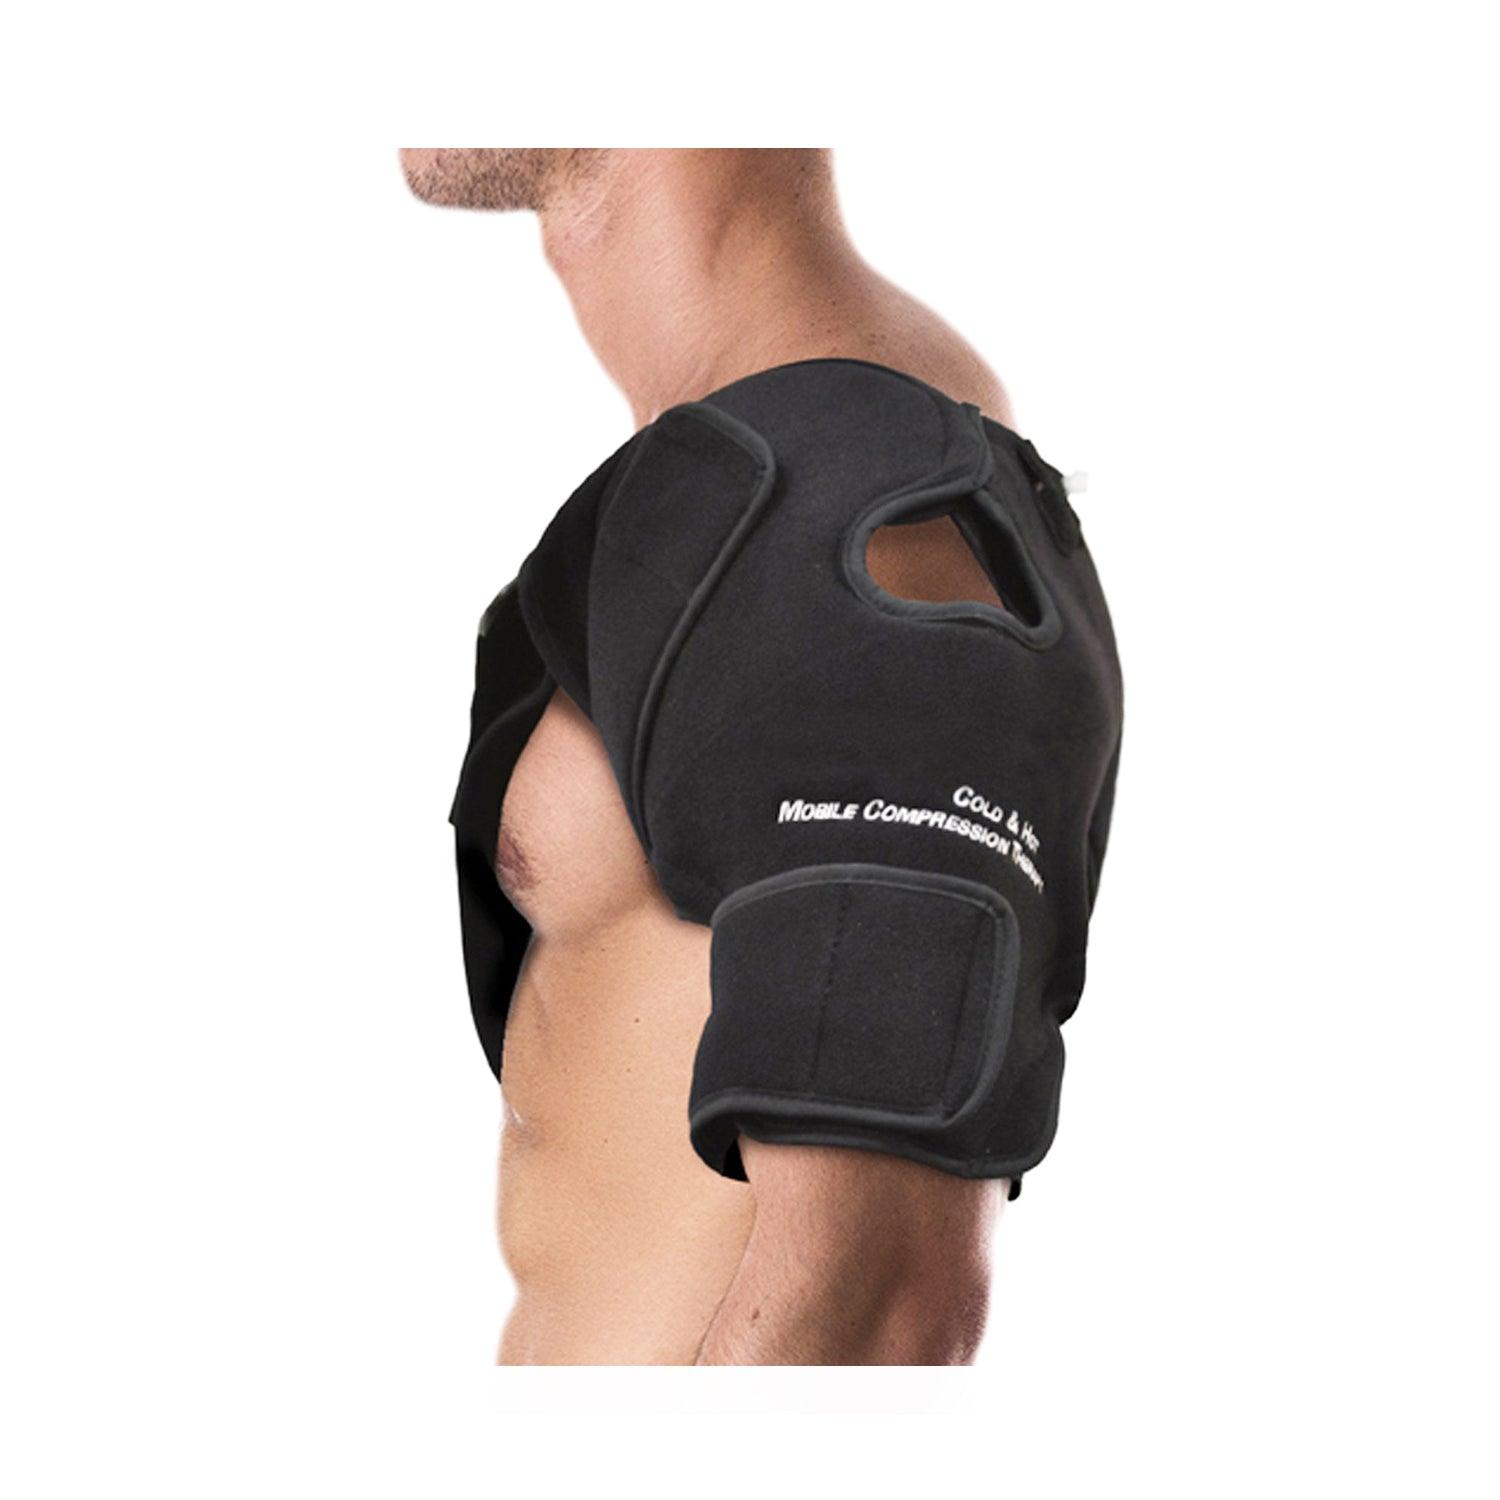 Astorn Adjustable Shoulder Brace for Rotator Cuff and AC Joint Pain Relief  - Compression Sleeve for Men and Women with Ice Pack Holder